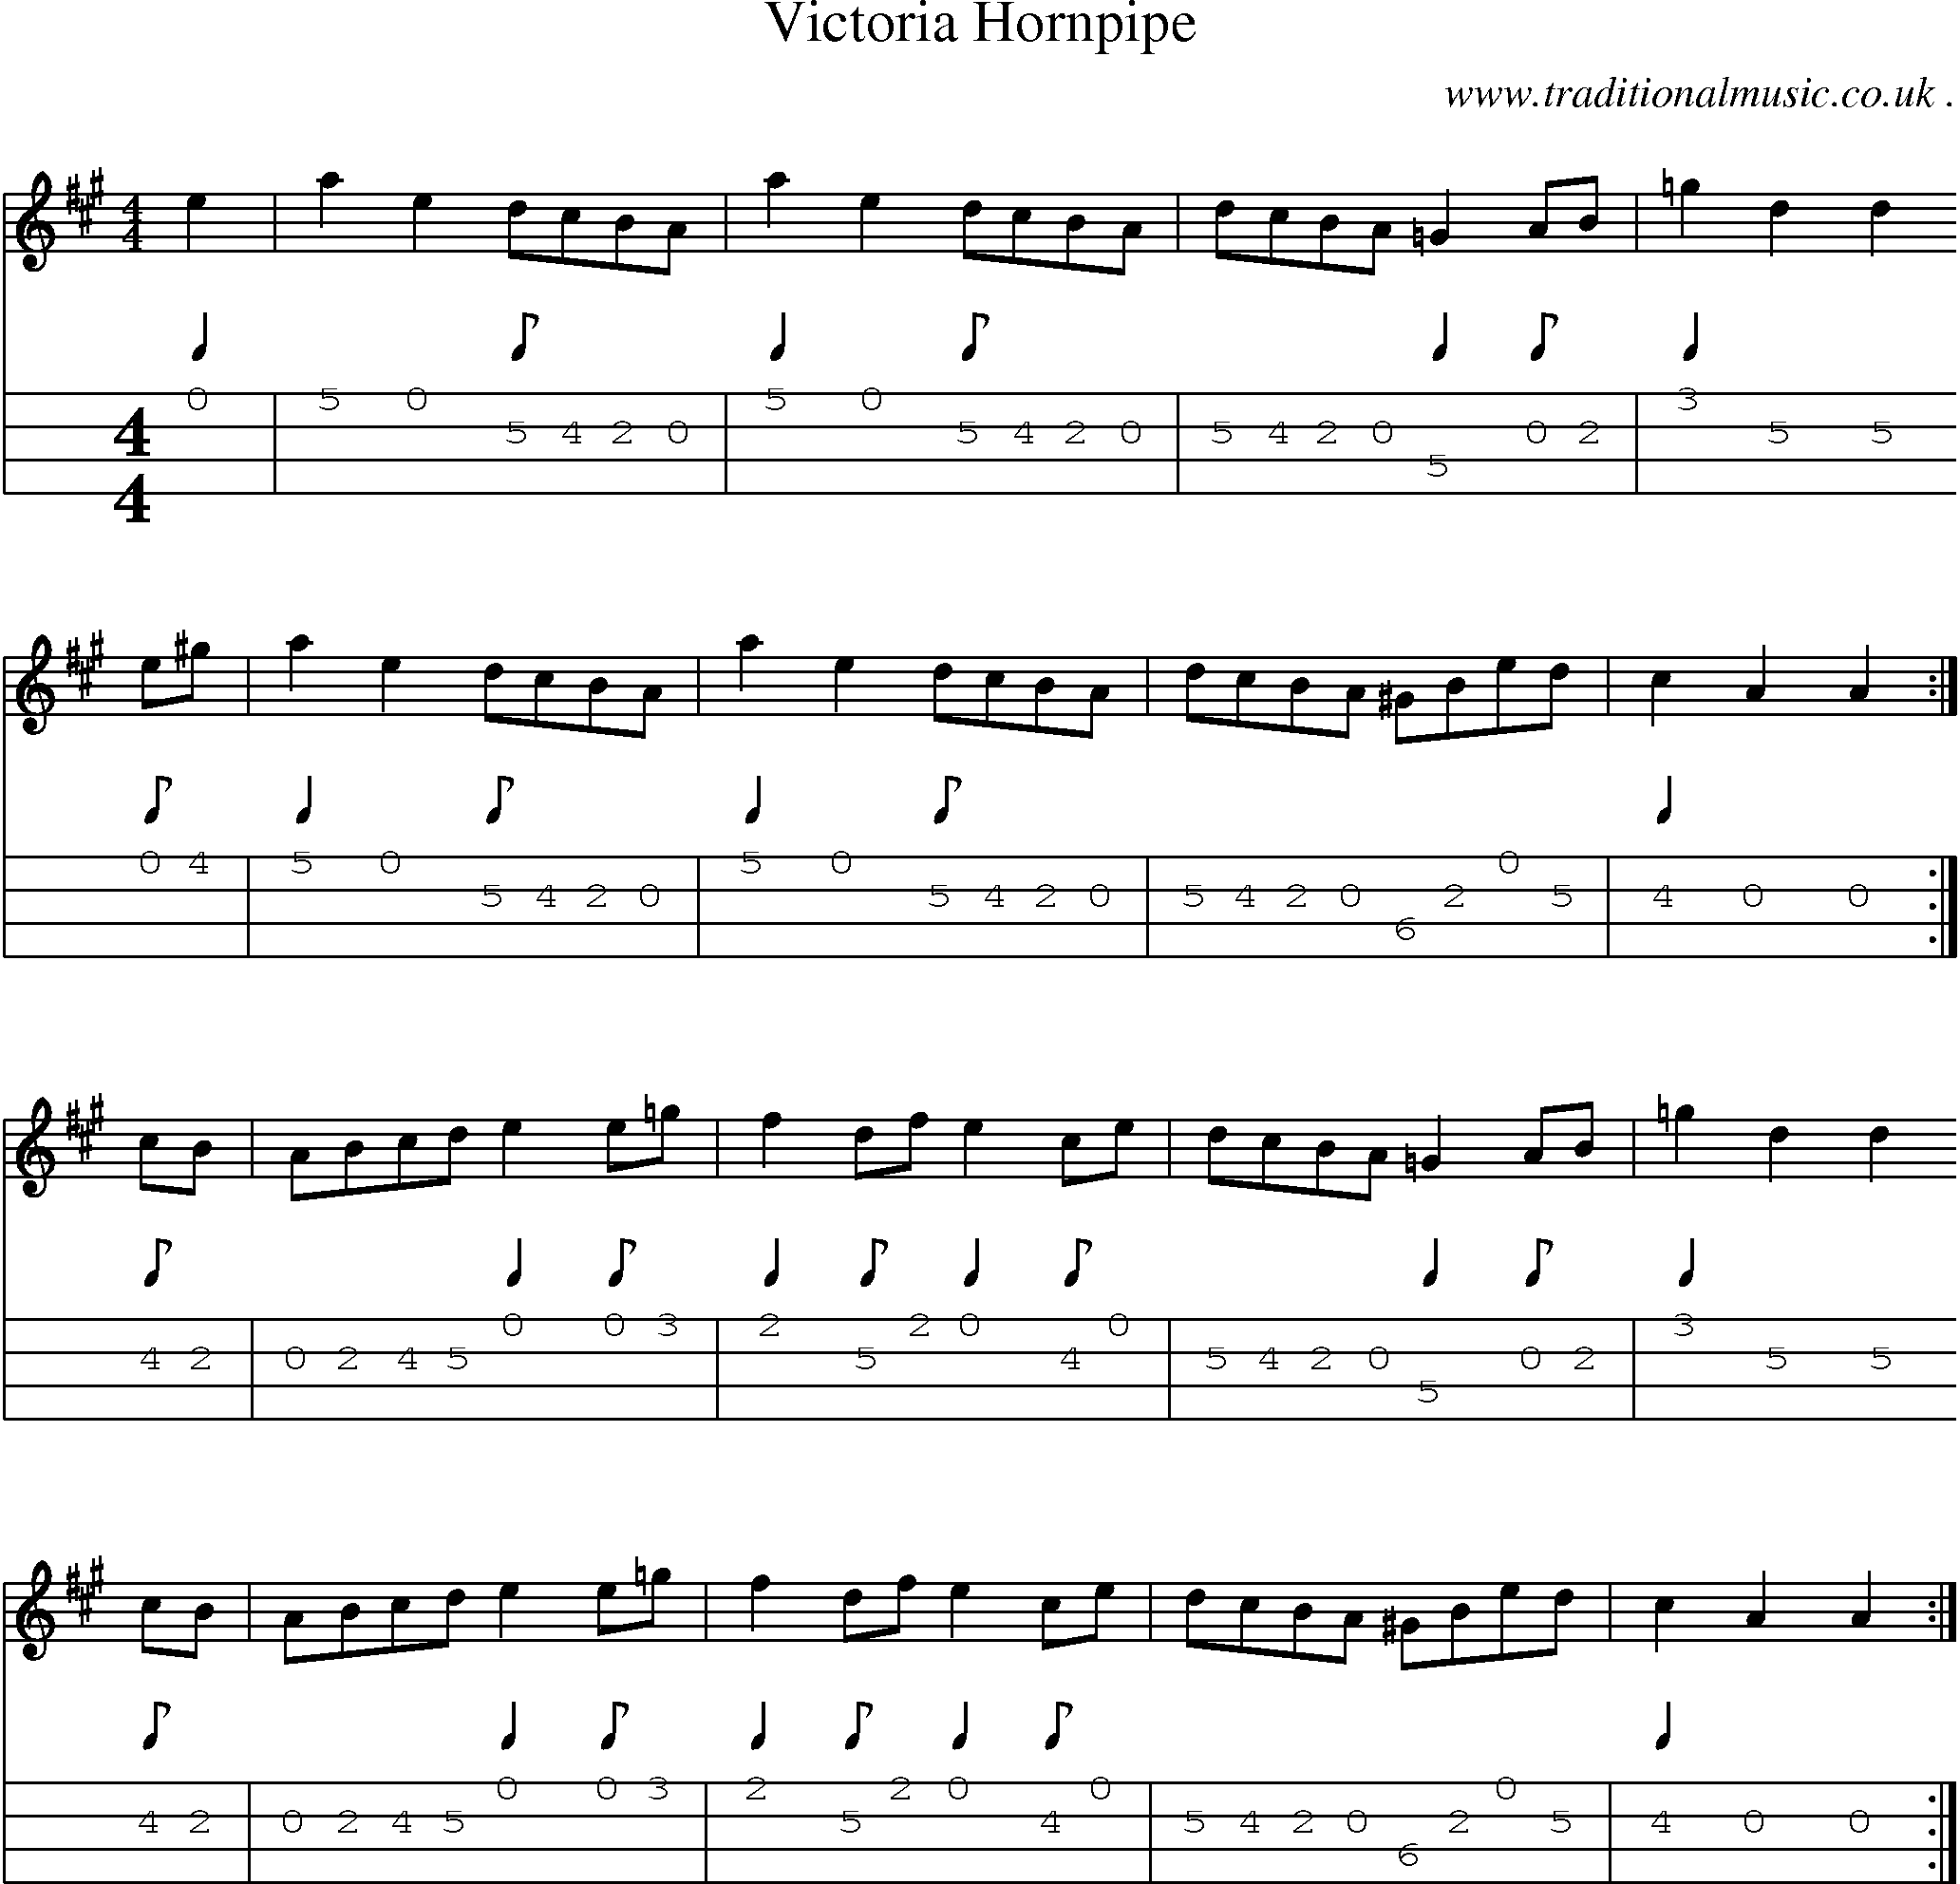 Sheet-music  score, Chords and Mandolin Tabs for Victoria Hornpipe